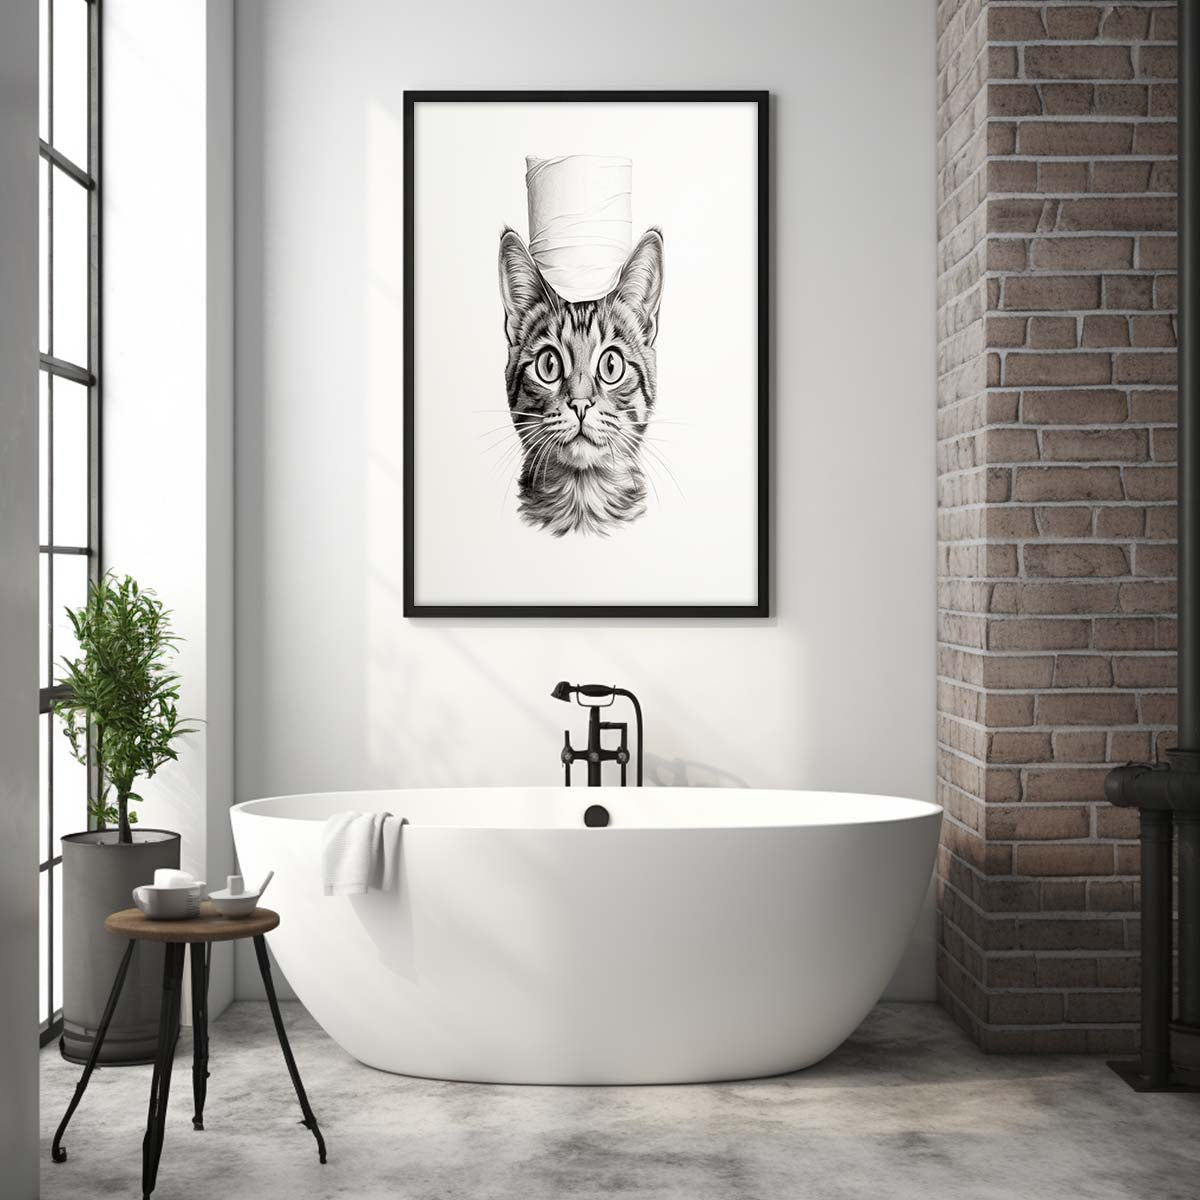 Cute Cat With Toilet Paper Canvas Art, Cat With Toilet Paper, Funny Cat Art, Bathroom Wall Decor, Home Decor, Bathroom Wall Art, Cat Wall Decor, Animal Decor, Pet Gift